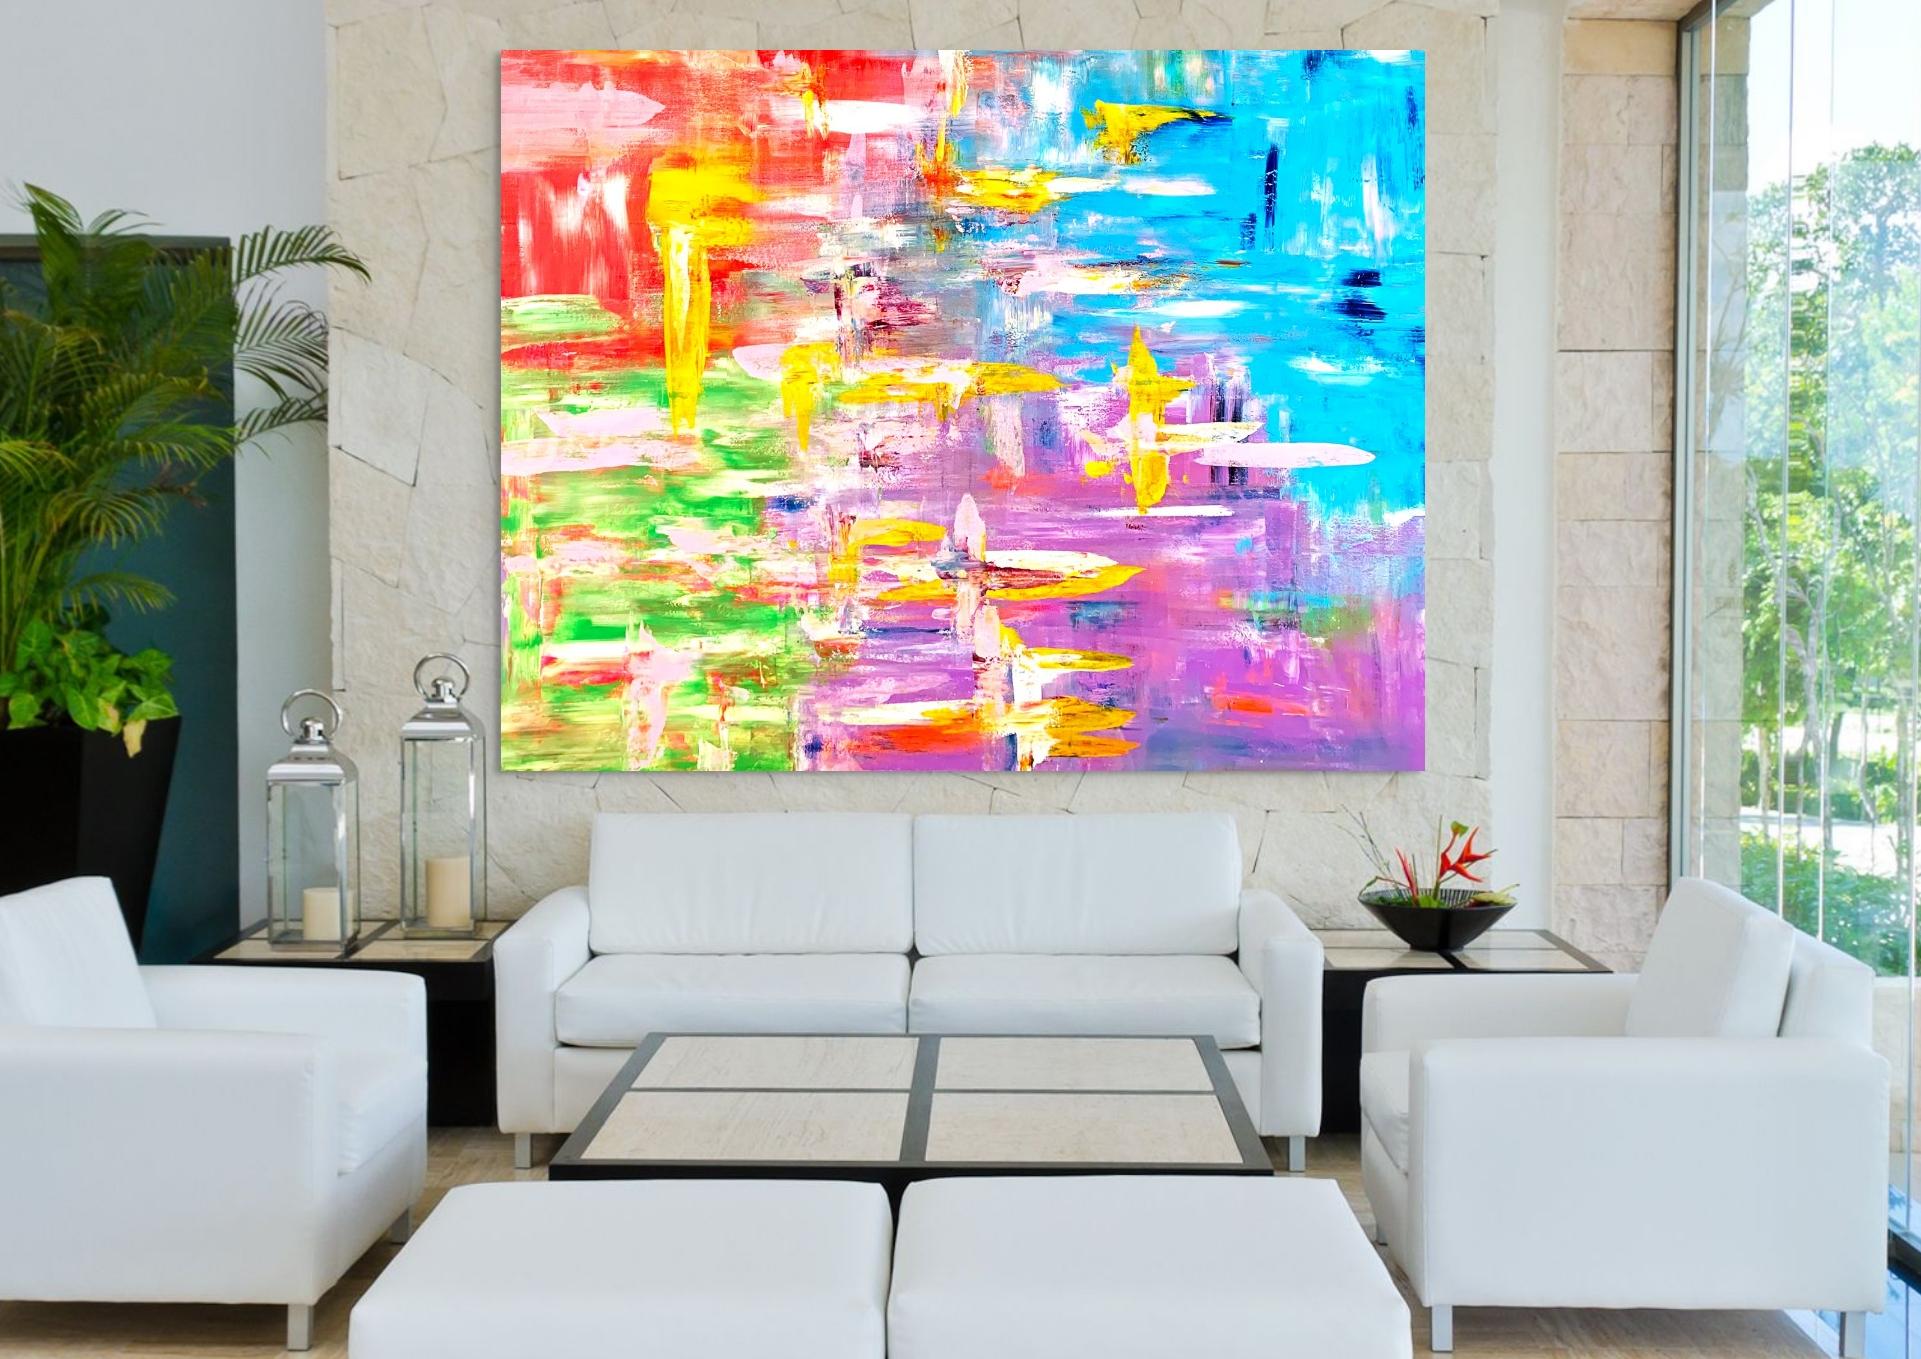 Four Colour Expectation - Painting by Estelle Asmodelle